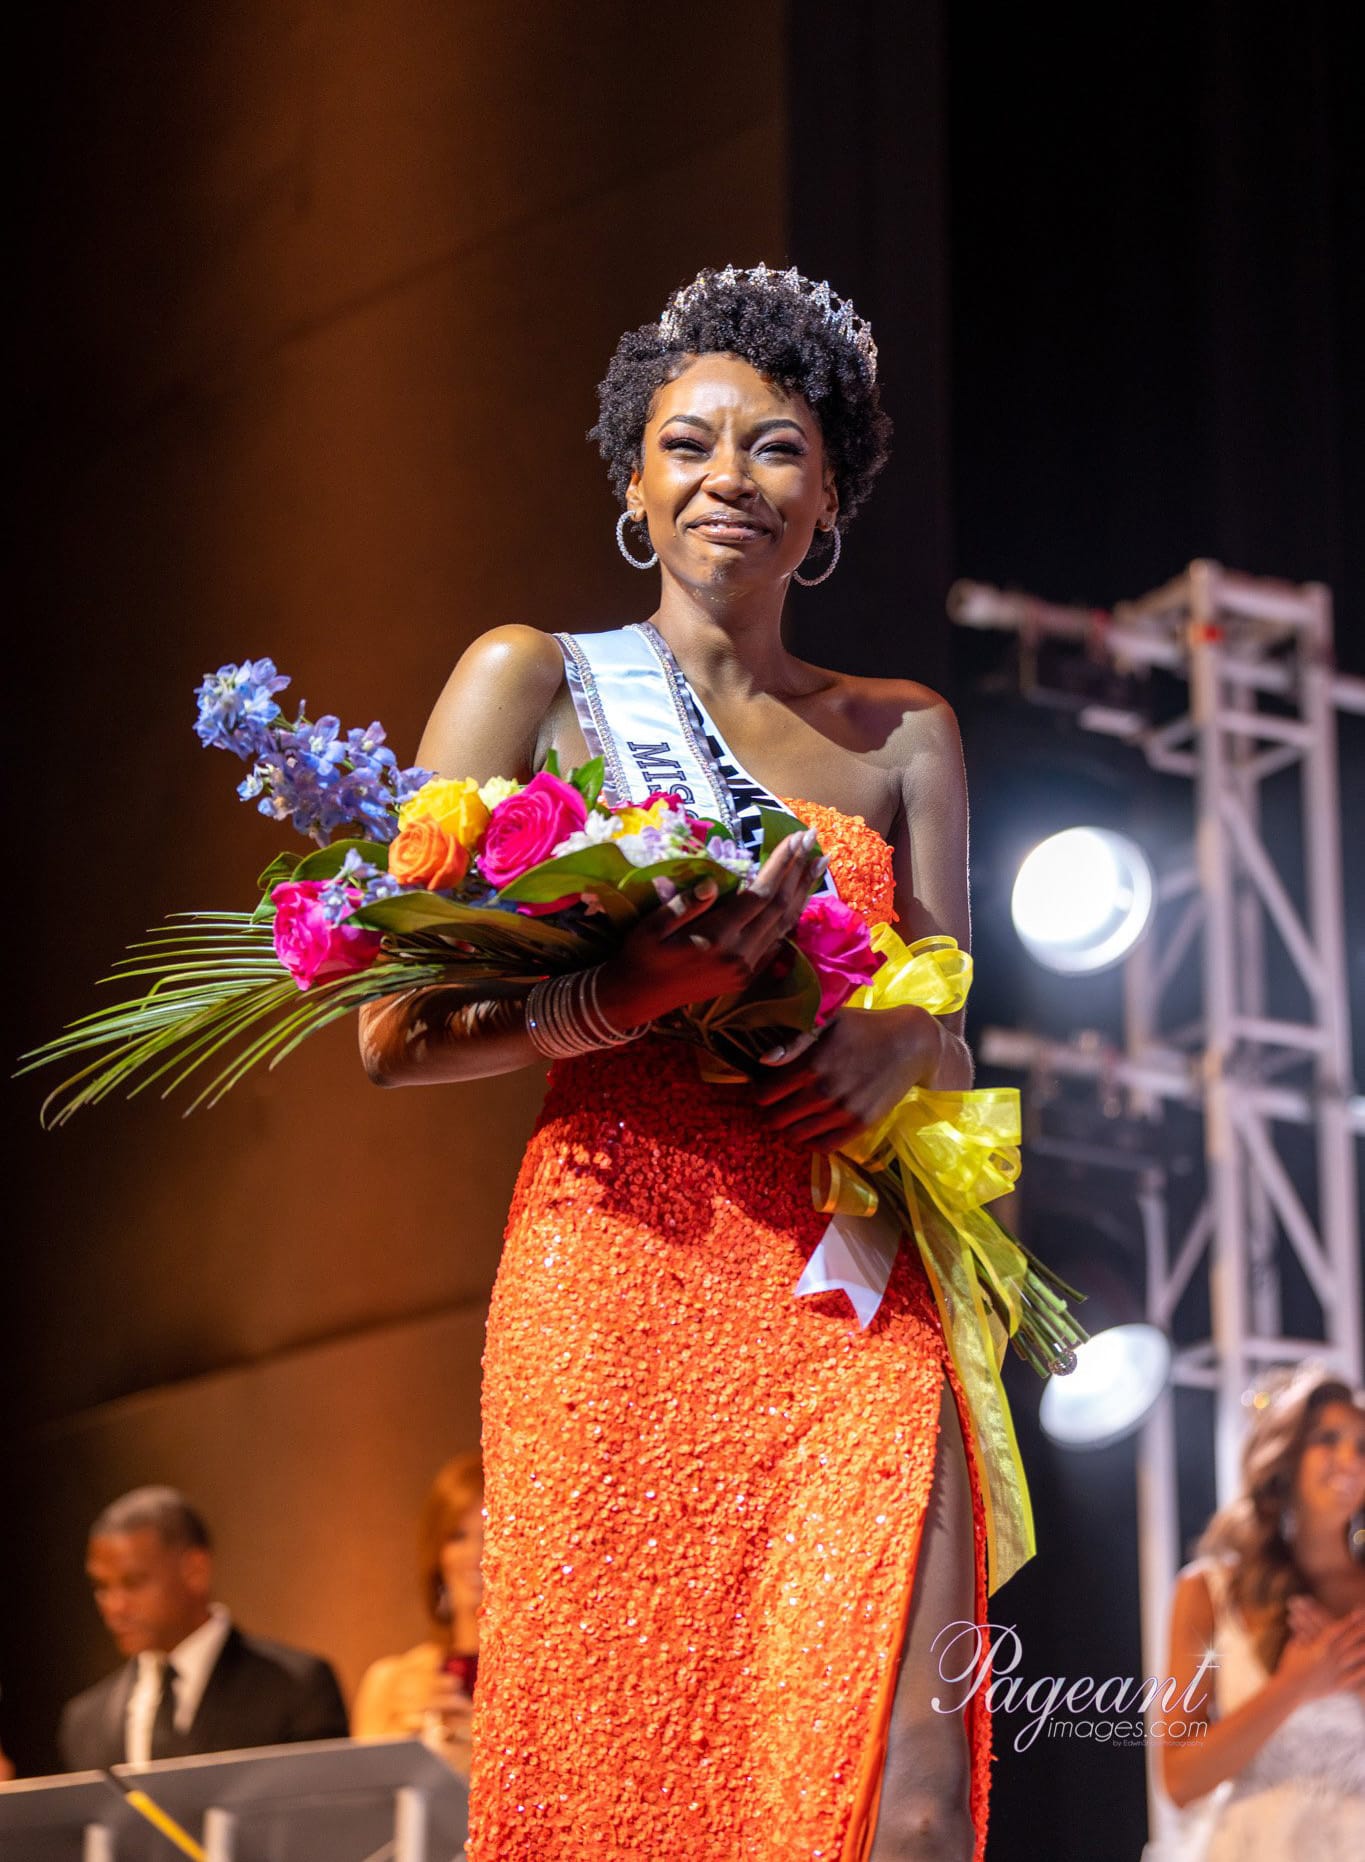 Sir'Quora Carroll is crowned Miss Ohio USA 2022